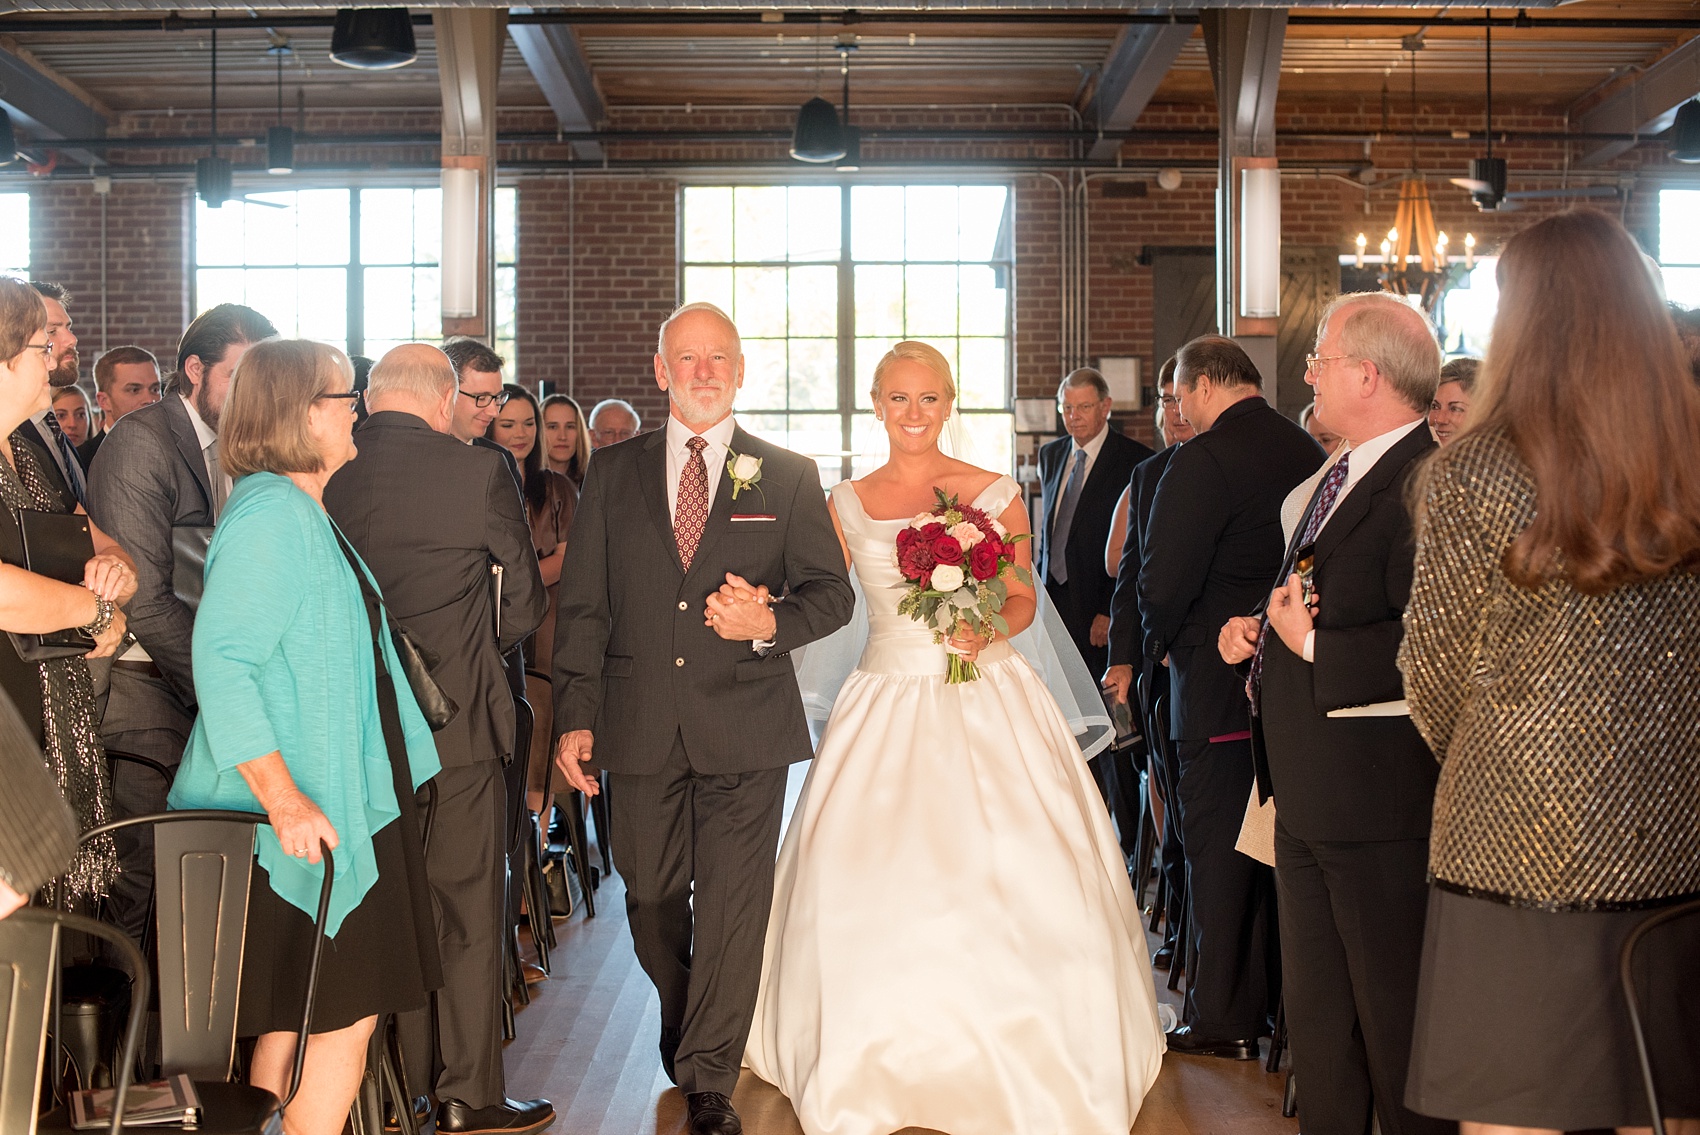 Mikkel Paige Photography photo of a wedding at The Rickhouse, Durham. A picture of the bride and her father walking down the aisle.